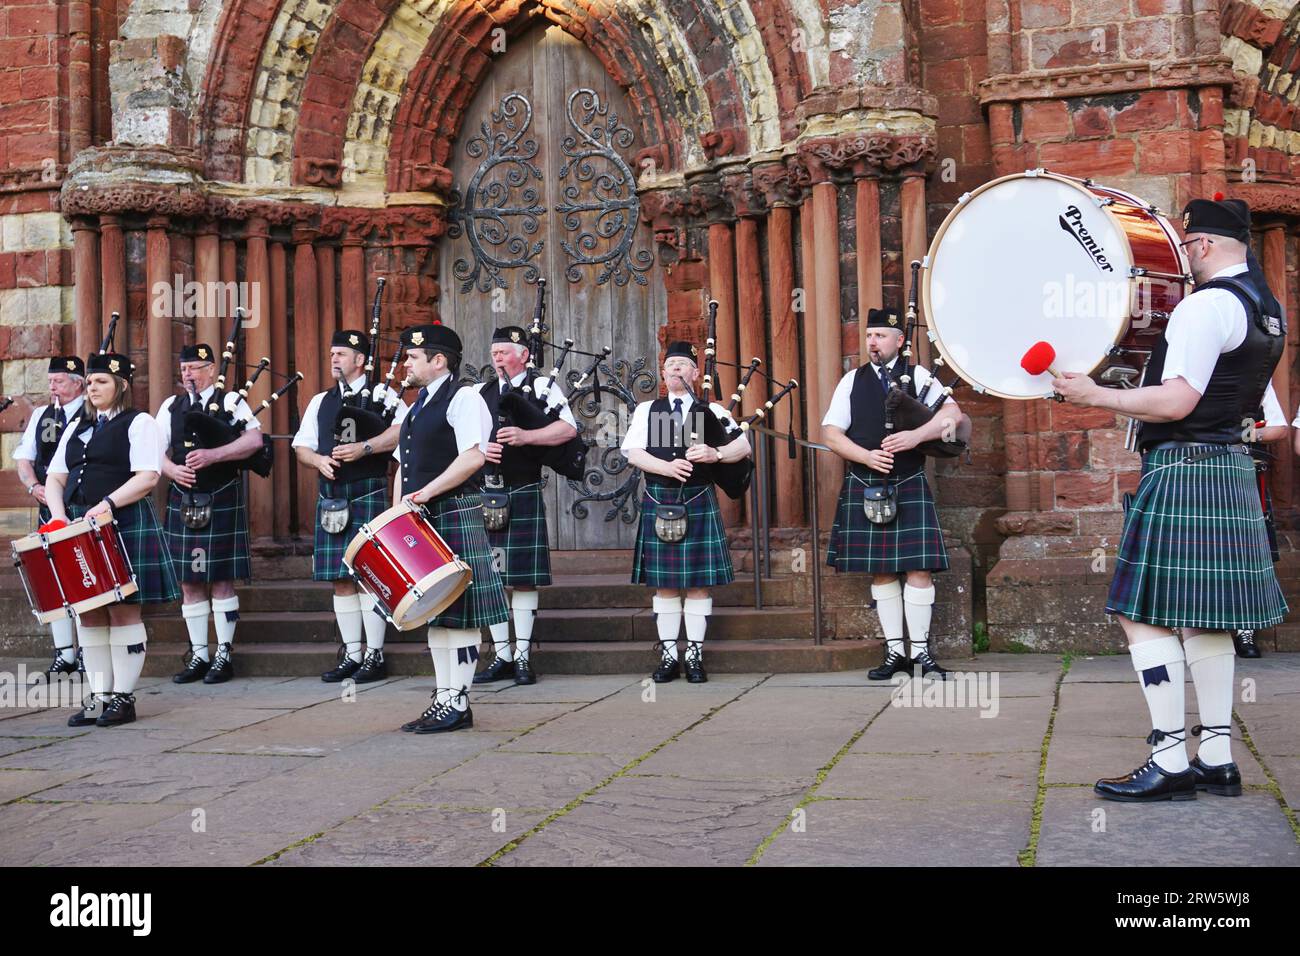 Bagpipers and drummers from the Kirkwall City Pipe Band perform in front of the historic St. Magnus Cathedral, Kirkwall, Orkney Island, Scotland Stock Photo